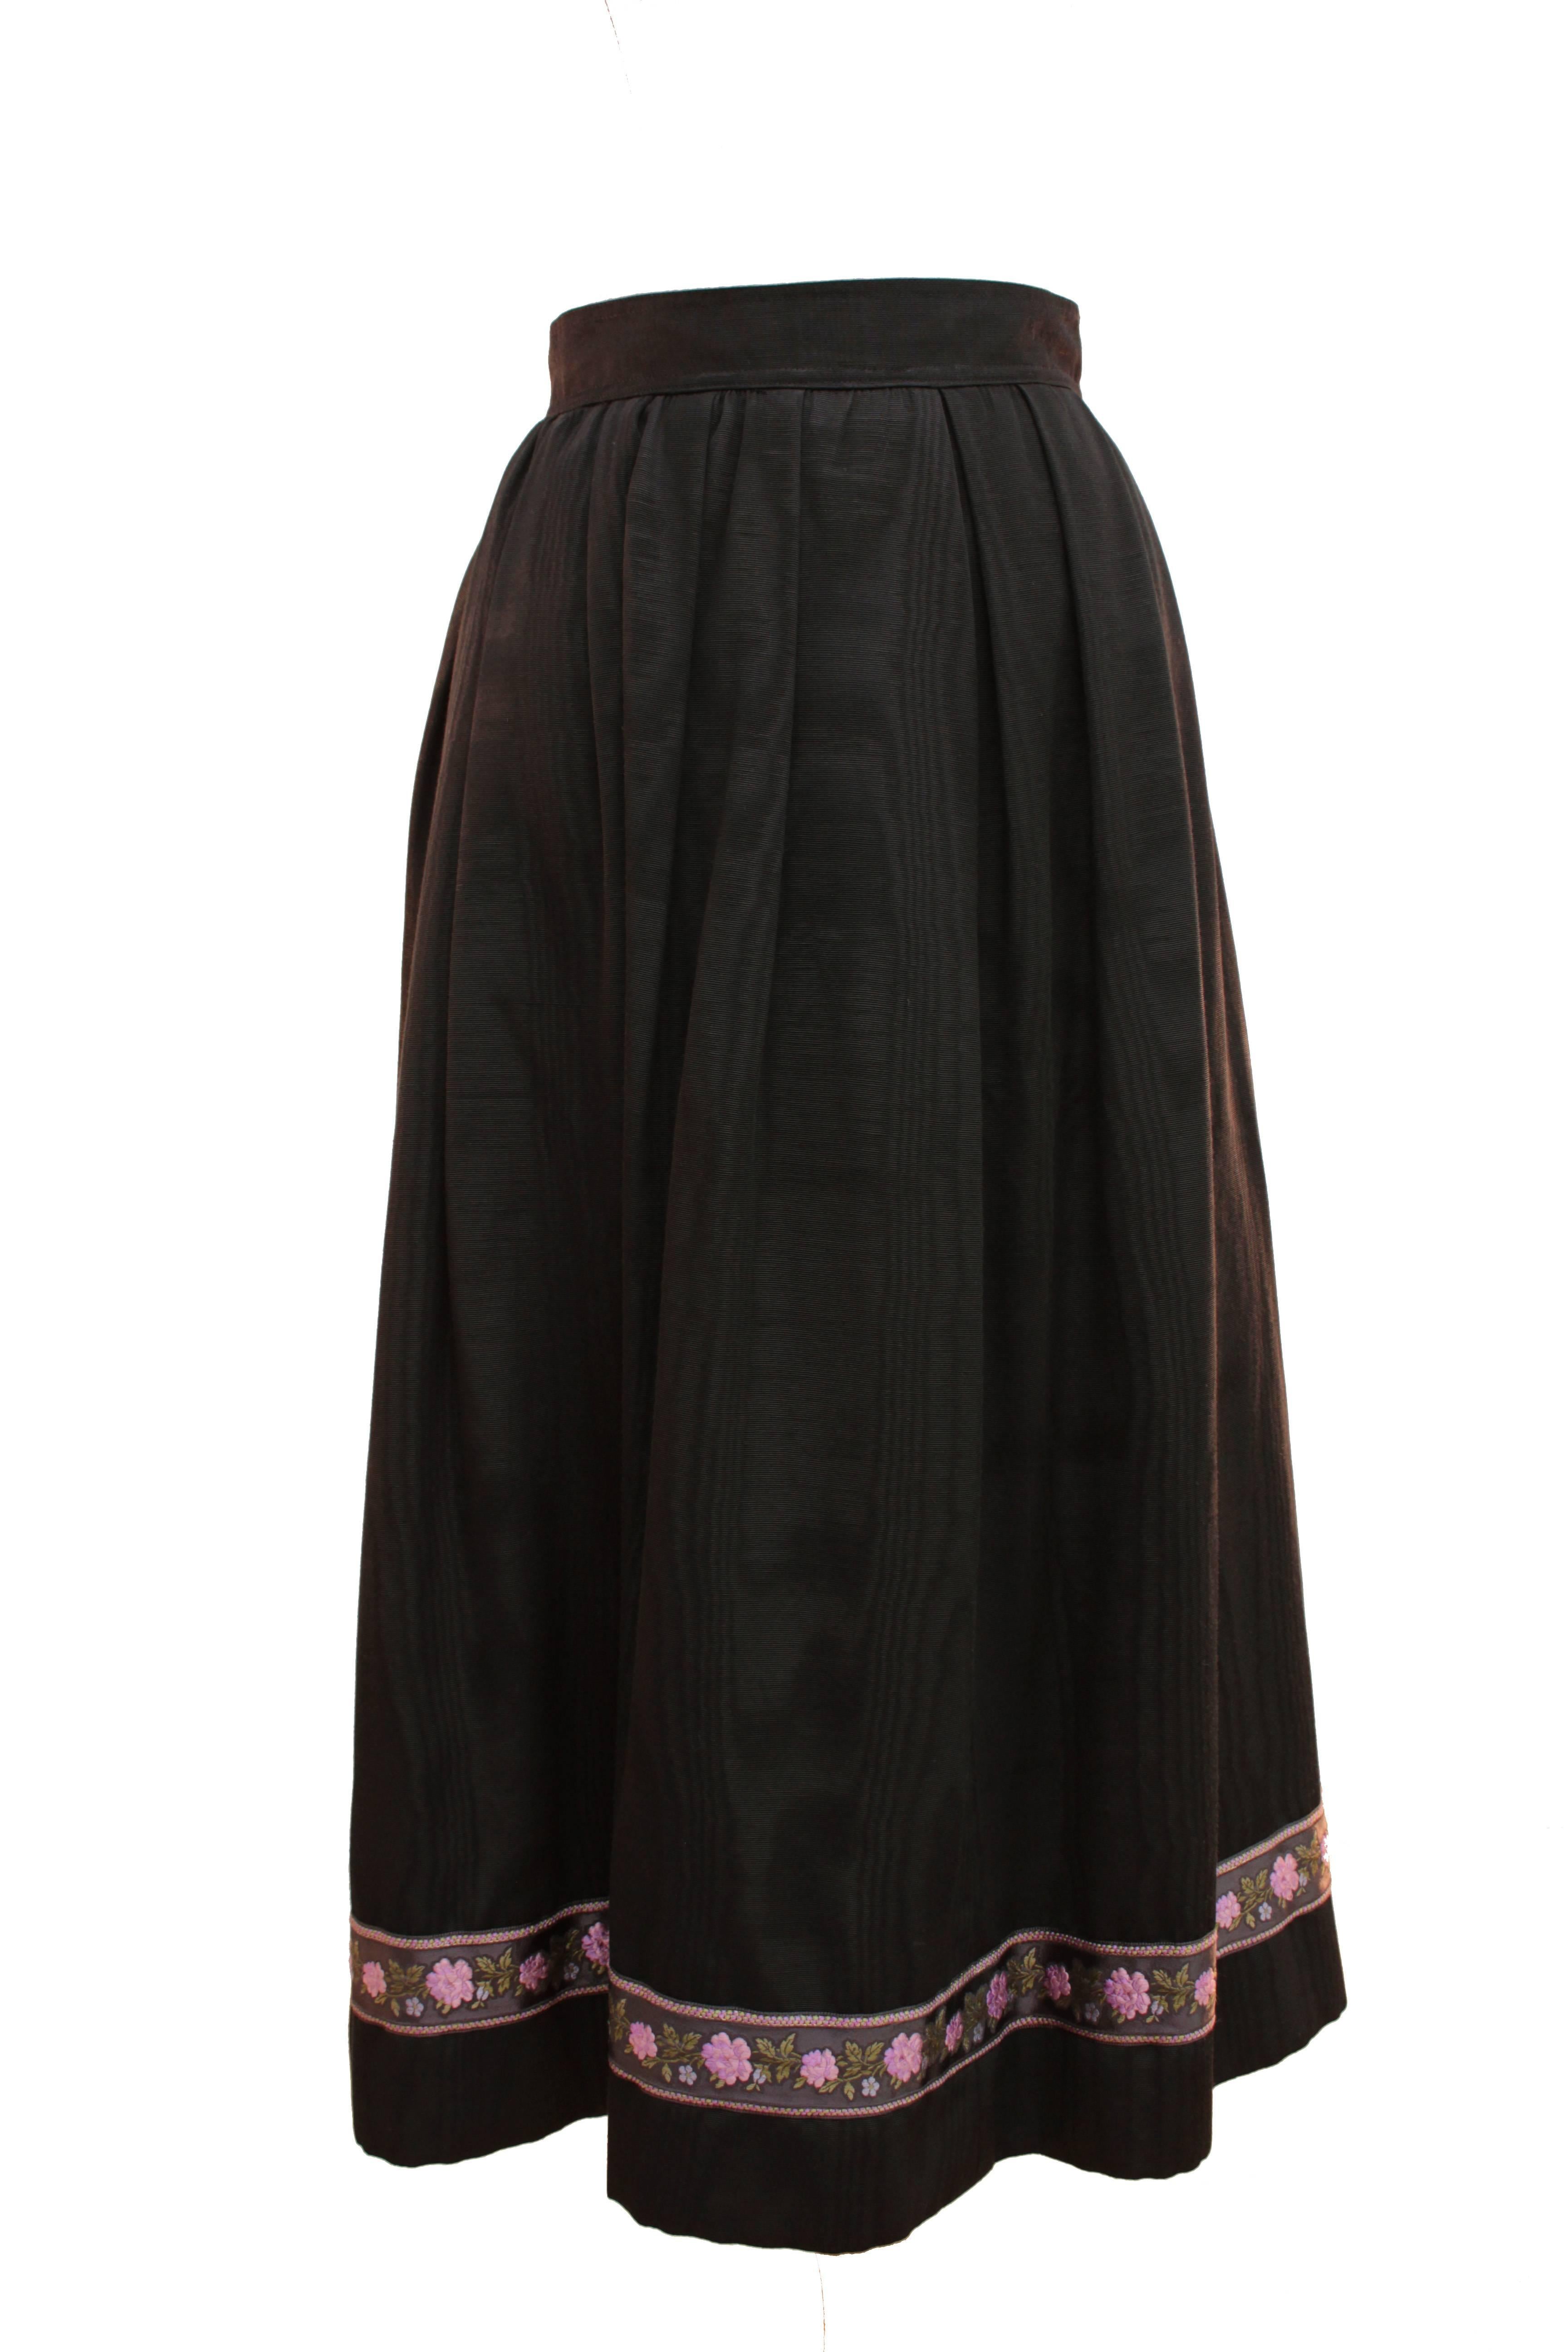 This incredible black moire silk skirt was designed by Yves Saint Laurent circa 1976. It's constructed with a high waistband and full skirt, and features an embroidered floral motif at the hem and hidden side pockets.  In excellent condition for its